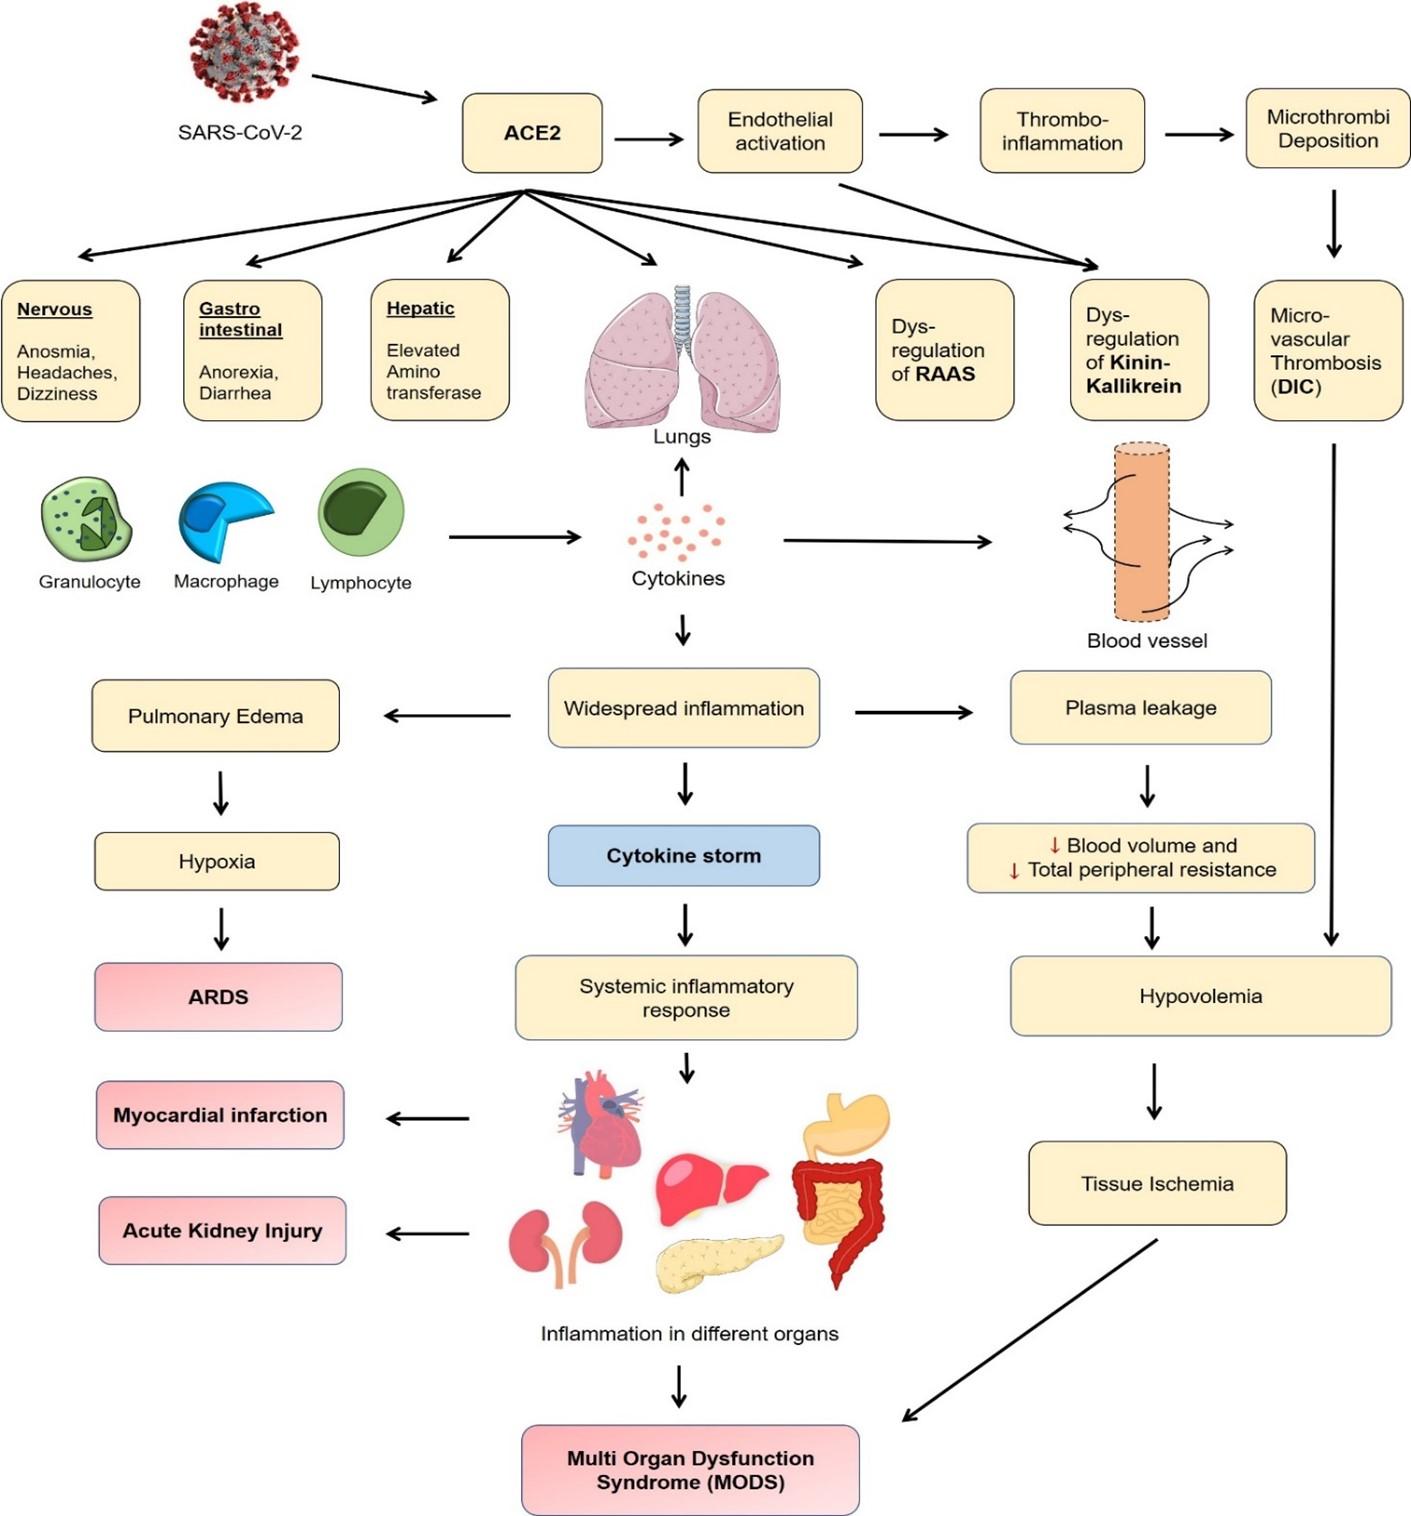 Pathophysiological mechanisms of disease severity in COVID-19: An update